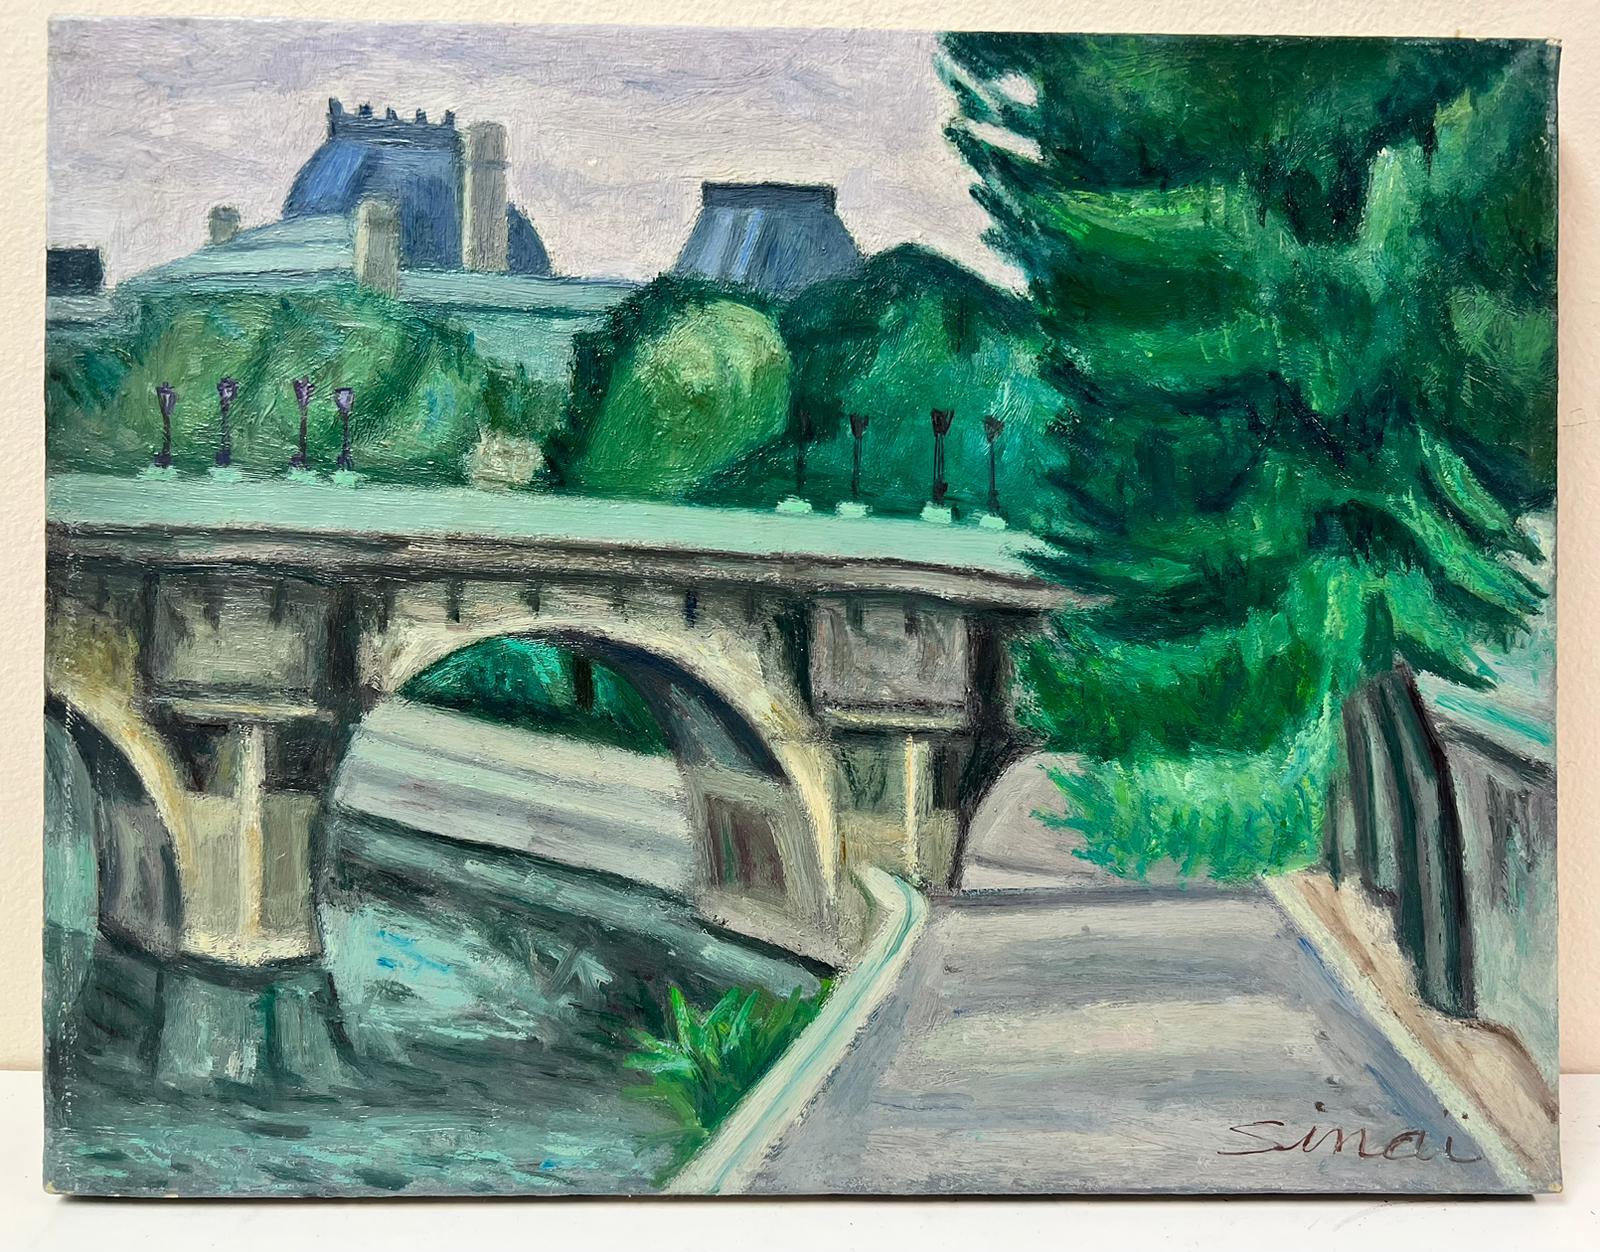 Paris, the River Seine
French School, late 20th century
signed
inscribed verso
oil painting on canvas, unframed
canvas: 10.5 x 14 inches
provenance: private collection, France
condition: very good and sound condition 
